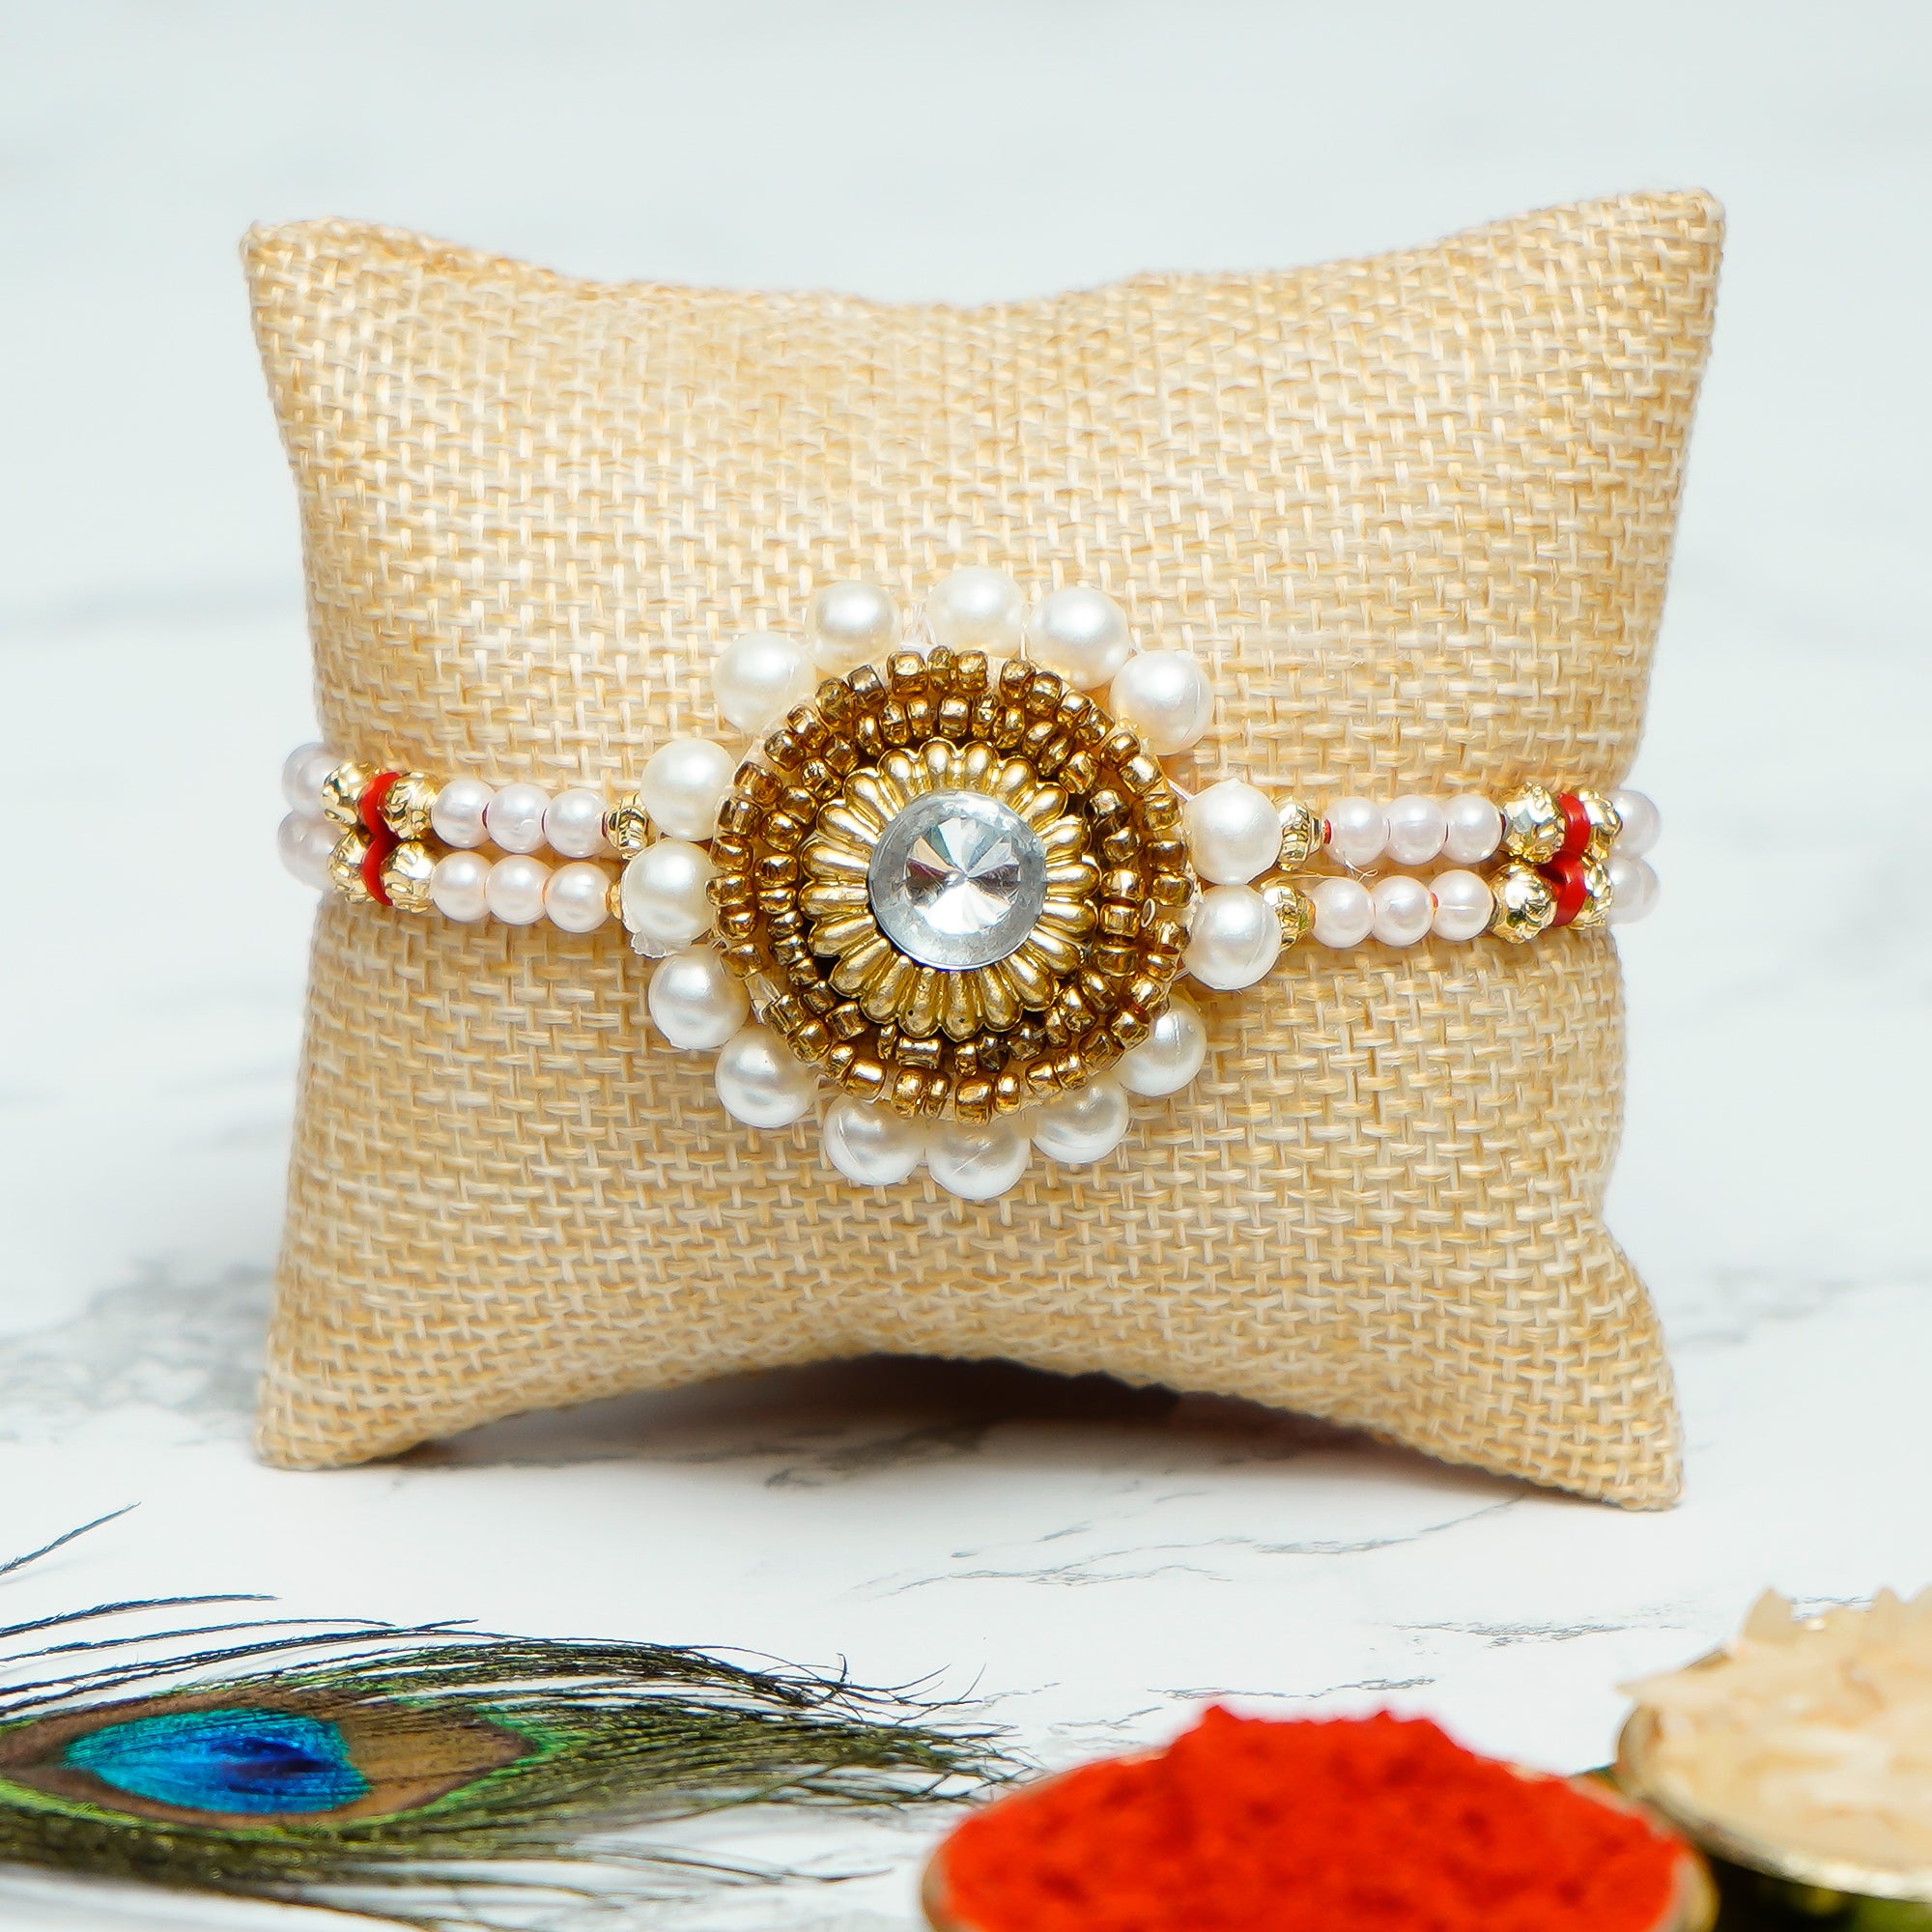 Designer Handcrafted Stone Pearl Rakhi with Brass Buddha Resting Antique Artifact and Roli Chawal Pack, Best Wishes Greeting Card 1